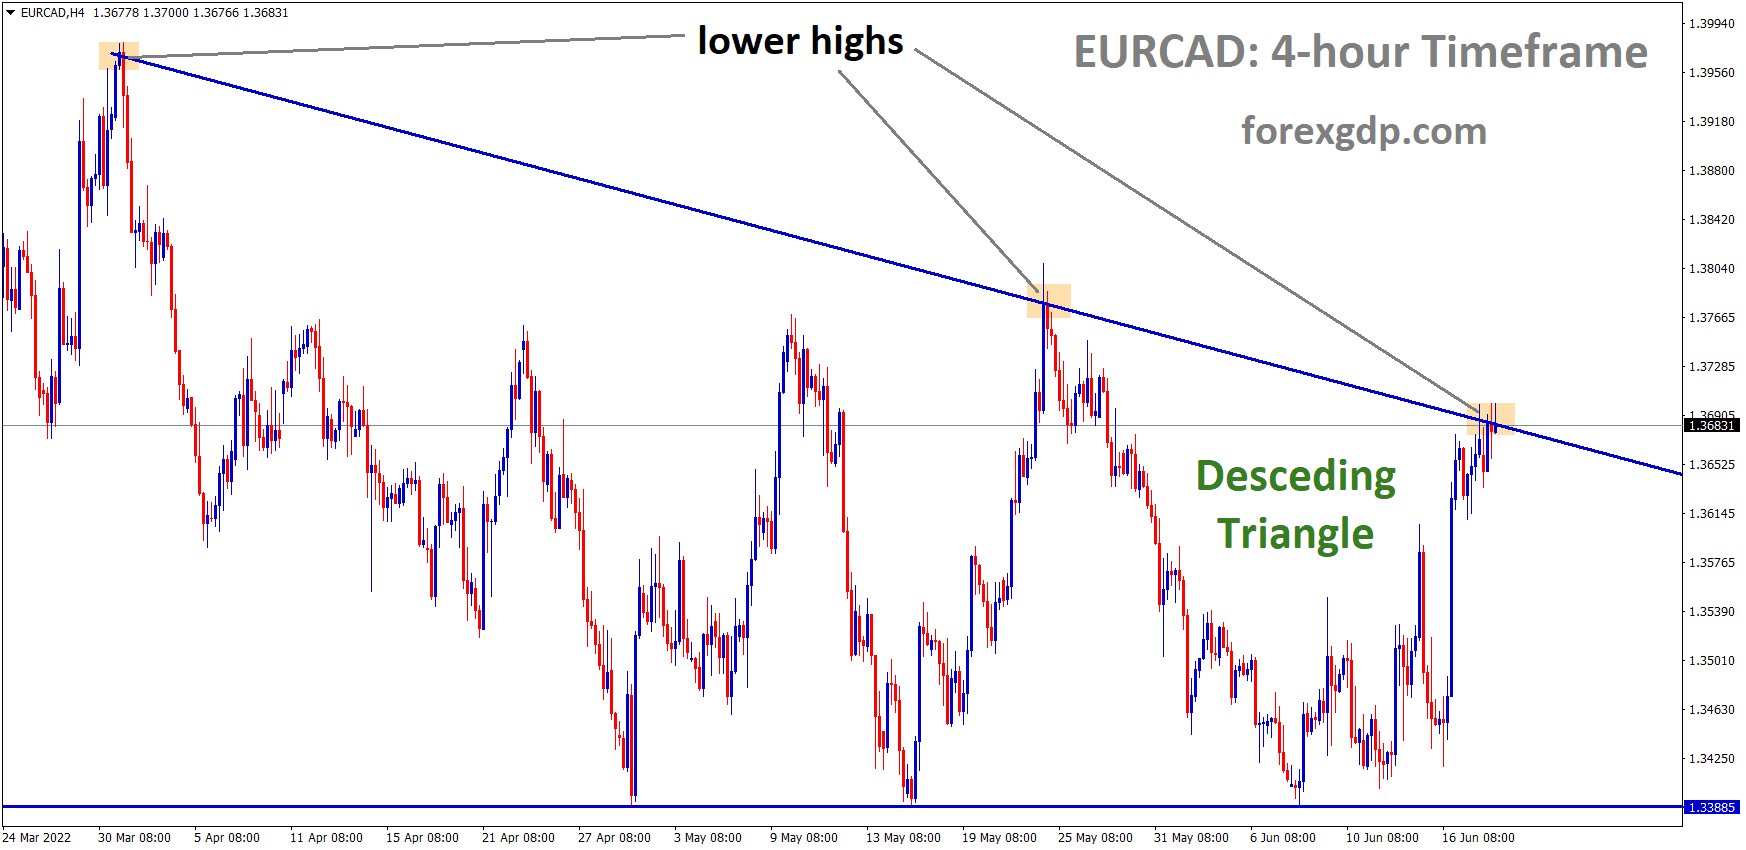 EURCAD is moving in the Descending triangle pattern and the Market has reached the Lower high area of the Triangle pattern1